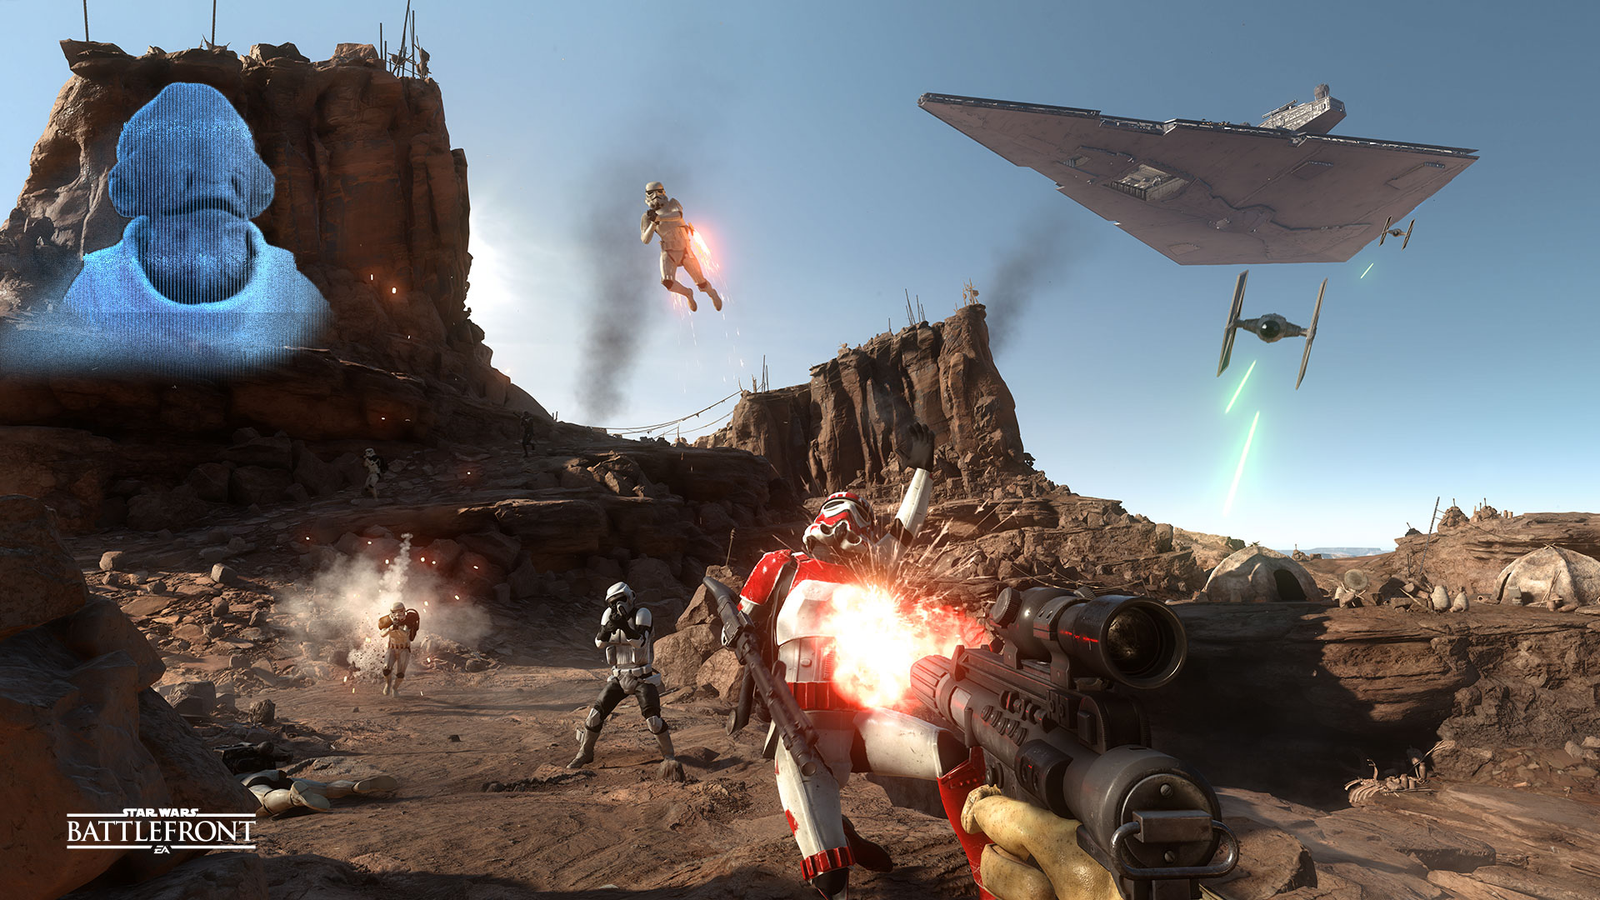 Star Wars Battlefront 2 open beta LIVE - Download on PS4, Xbox One, PC  release right NOW, Gaming, Entertainment